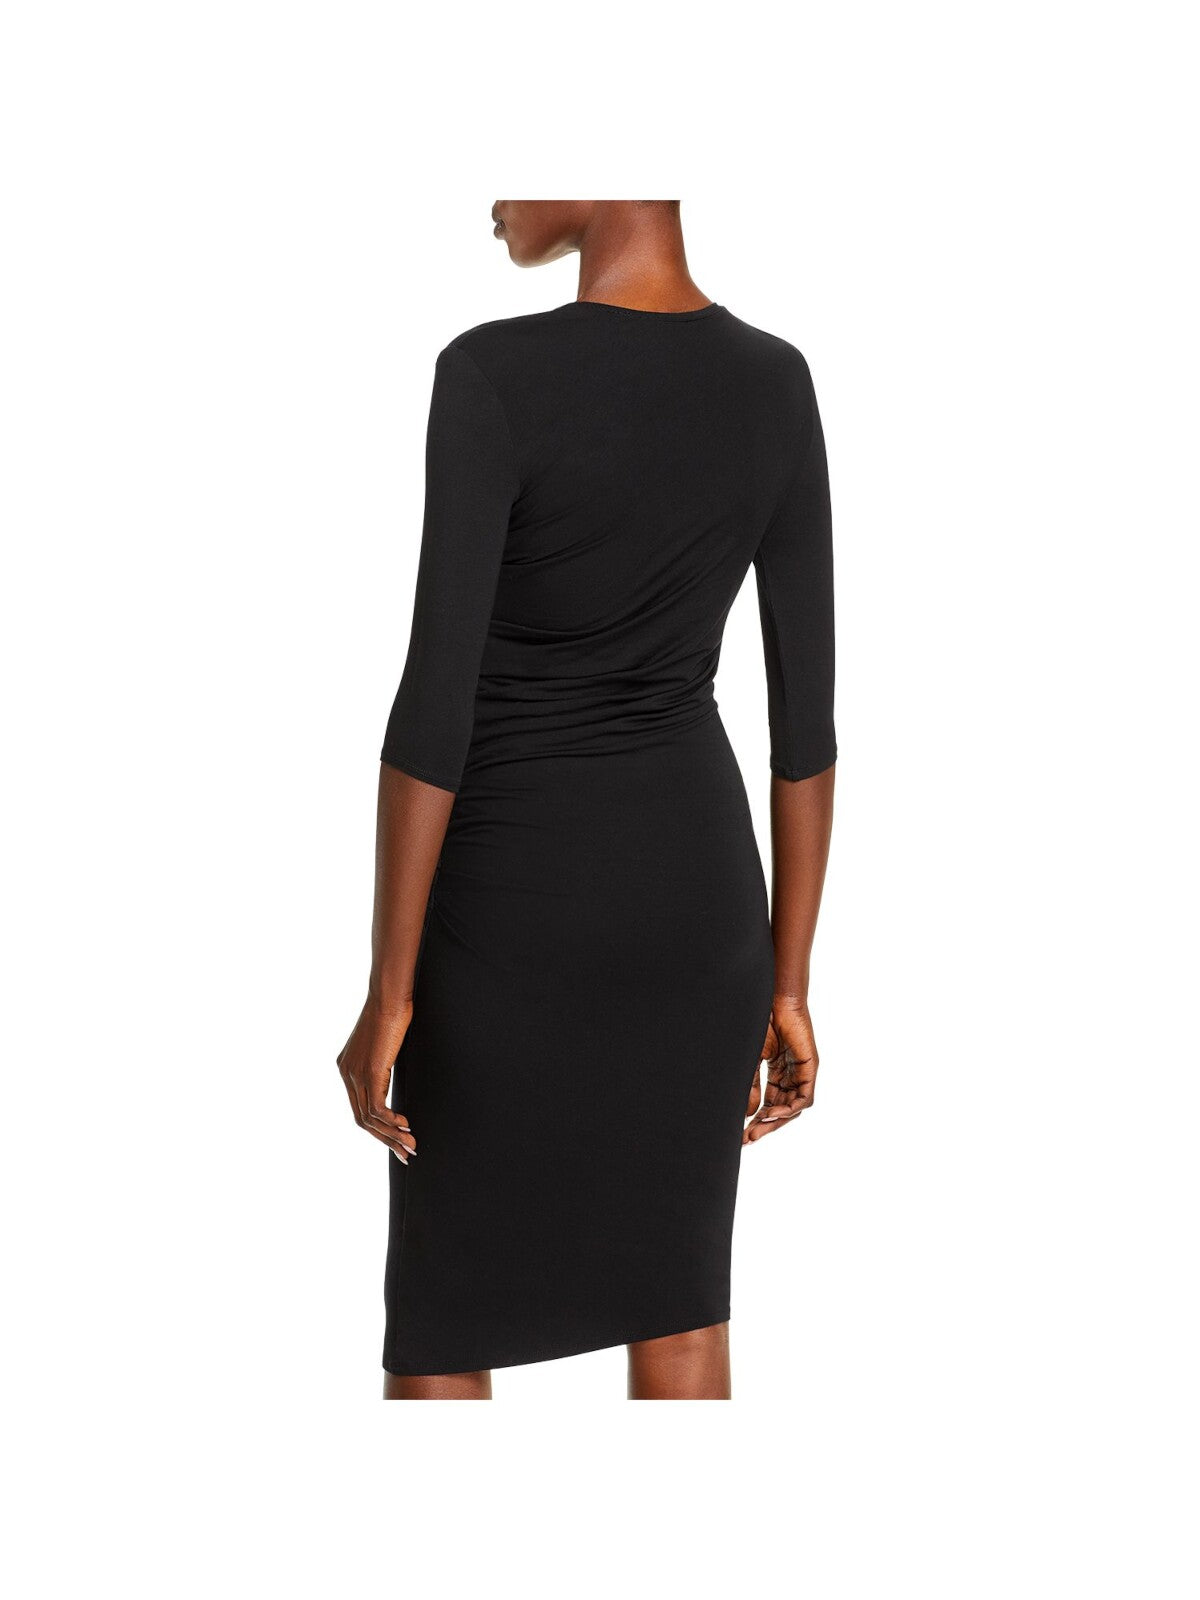 HELMUT LANG Womens Black Stretch Ruched Jersey 3/4 Sleeve Crew Neck Knee Length Cocktail Sheath Dress S